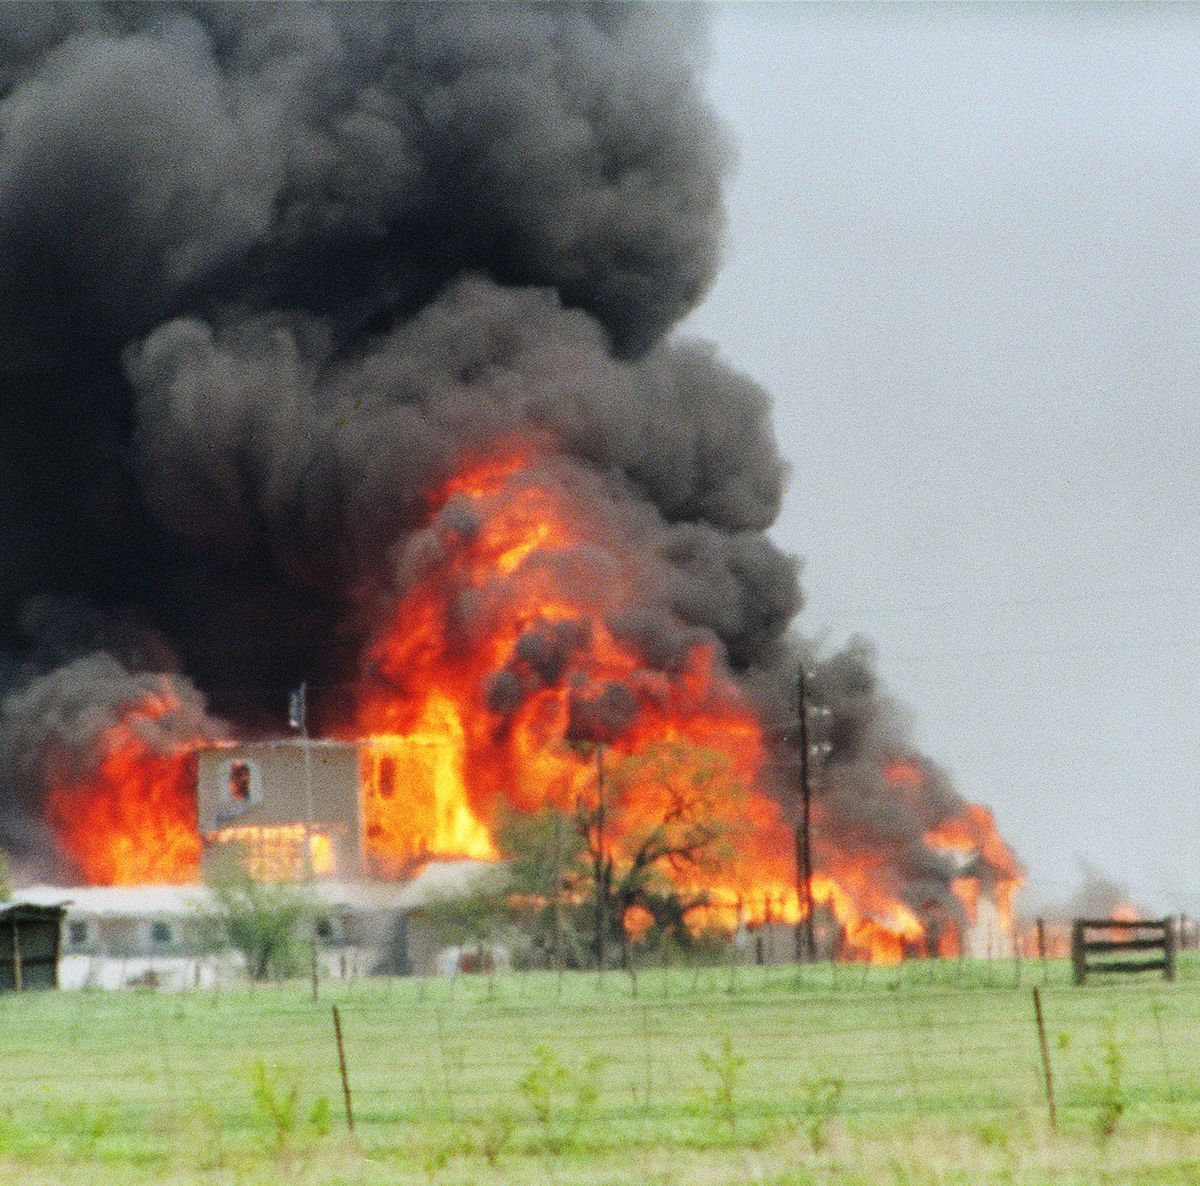 flames erupting from a compound, with smoke billowing into the air